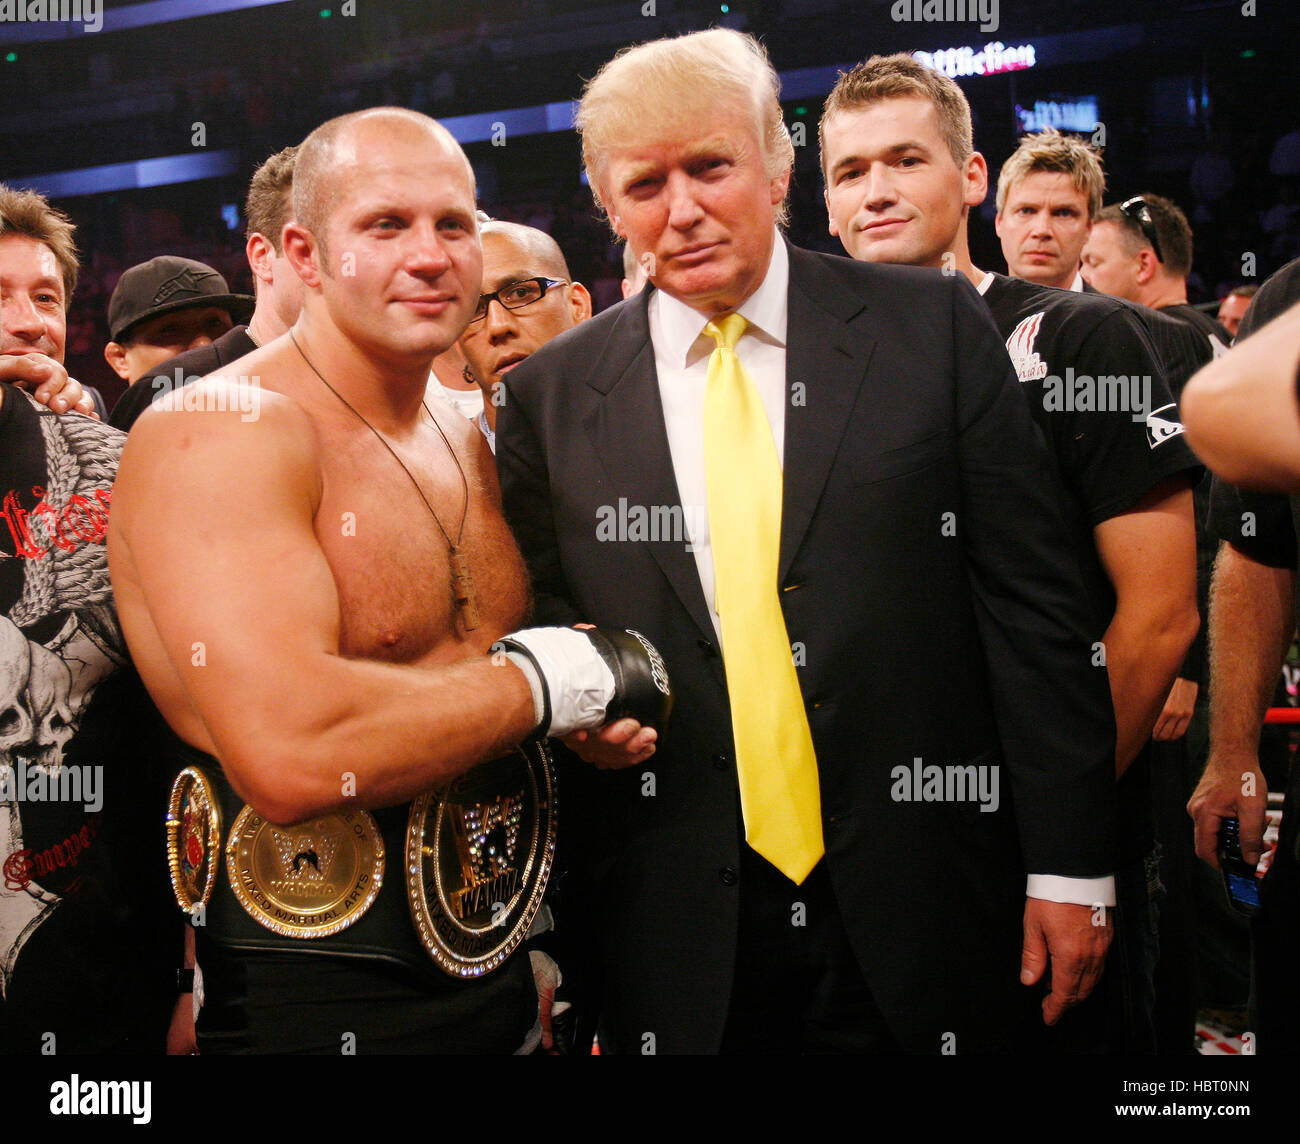 fedor-emelianenko-poses-with-donald-trump-in-the-ring-after-defeating-HBT0NN.jpg